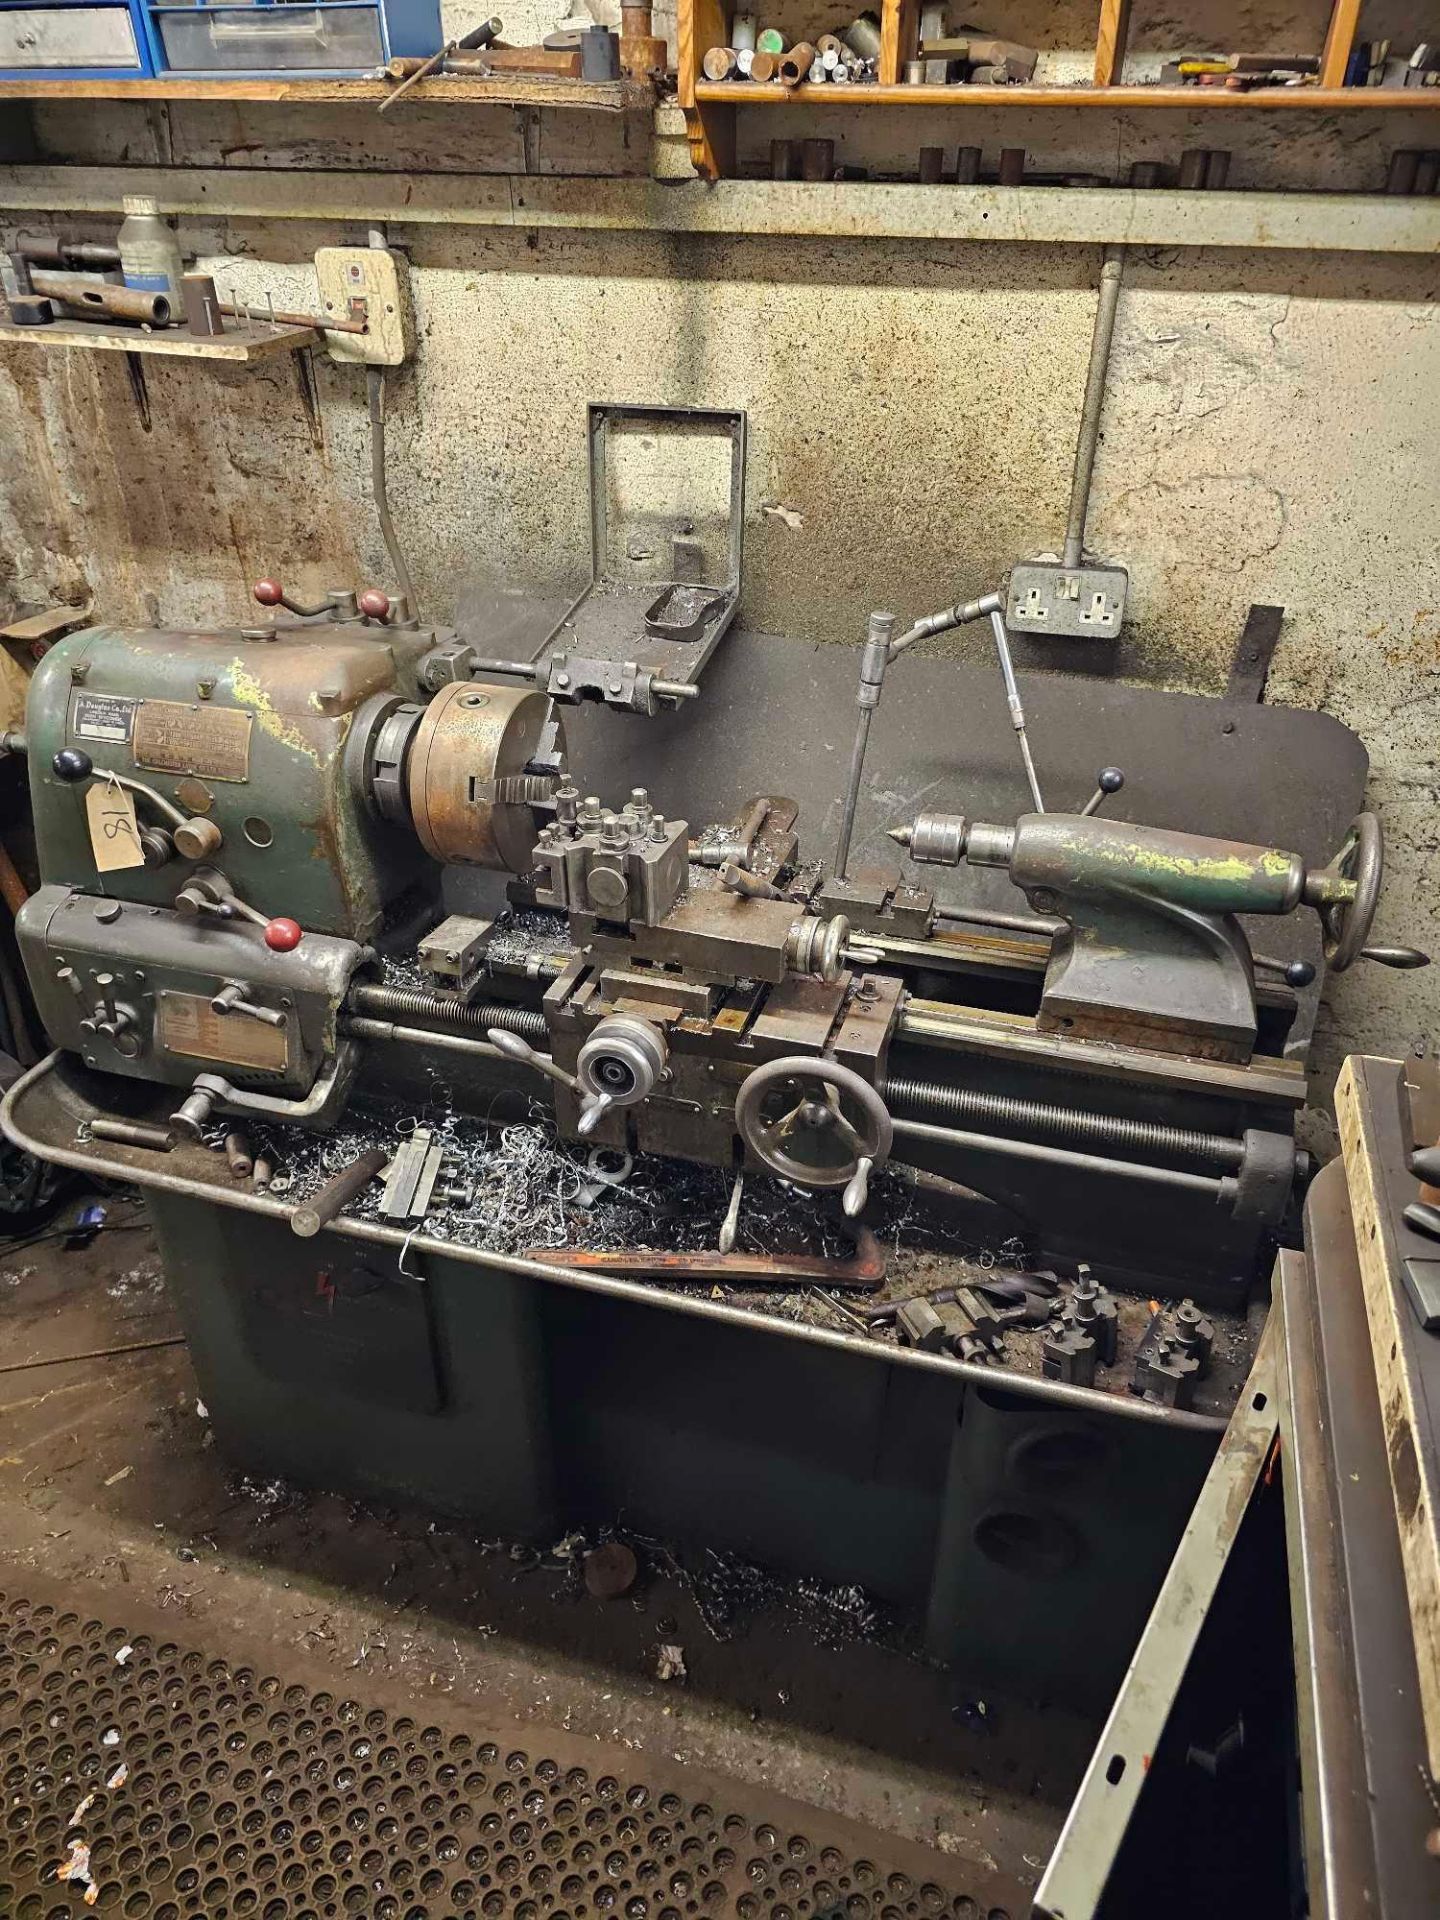 Colchester Lathe 50 Cycle 2 Phase 3.0HP Complete With A Wide Range Of Tooling - Image 3 of 7